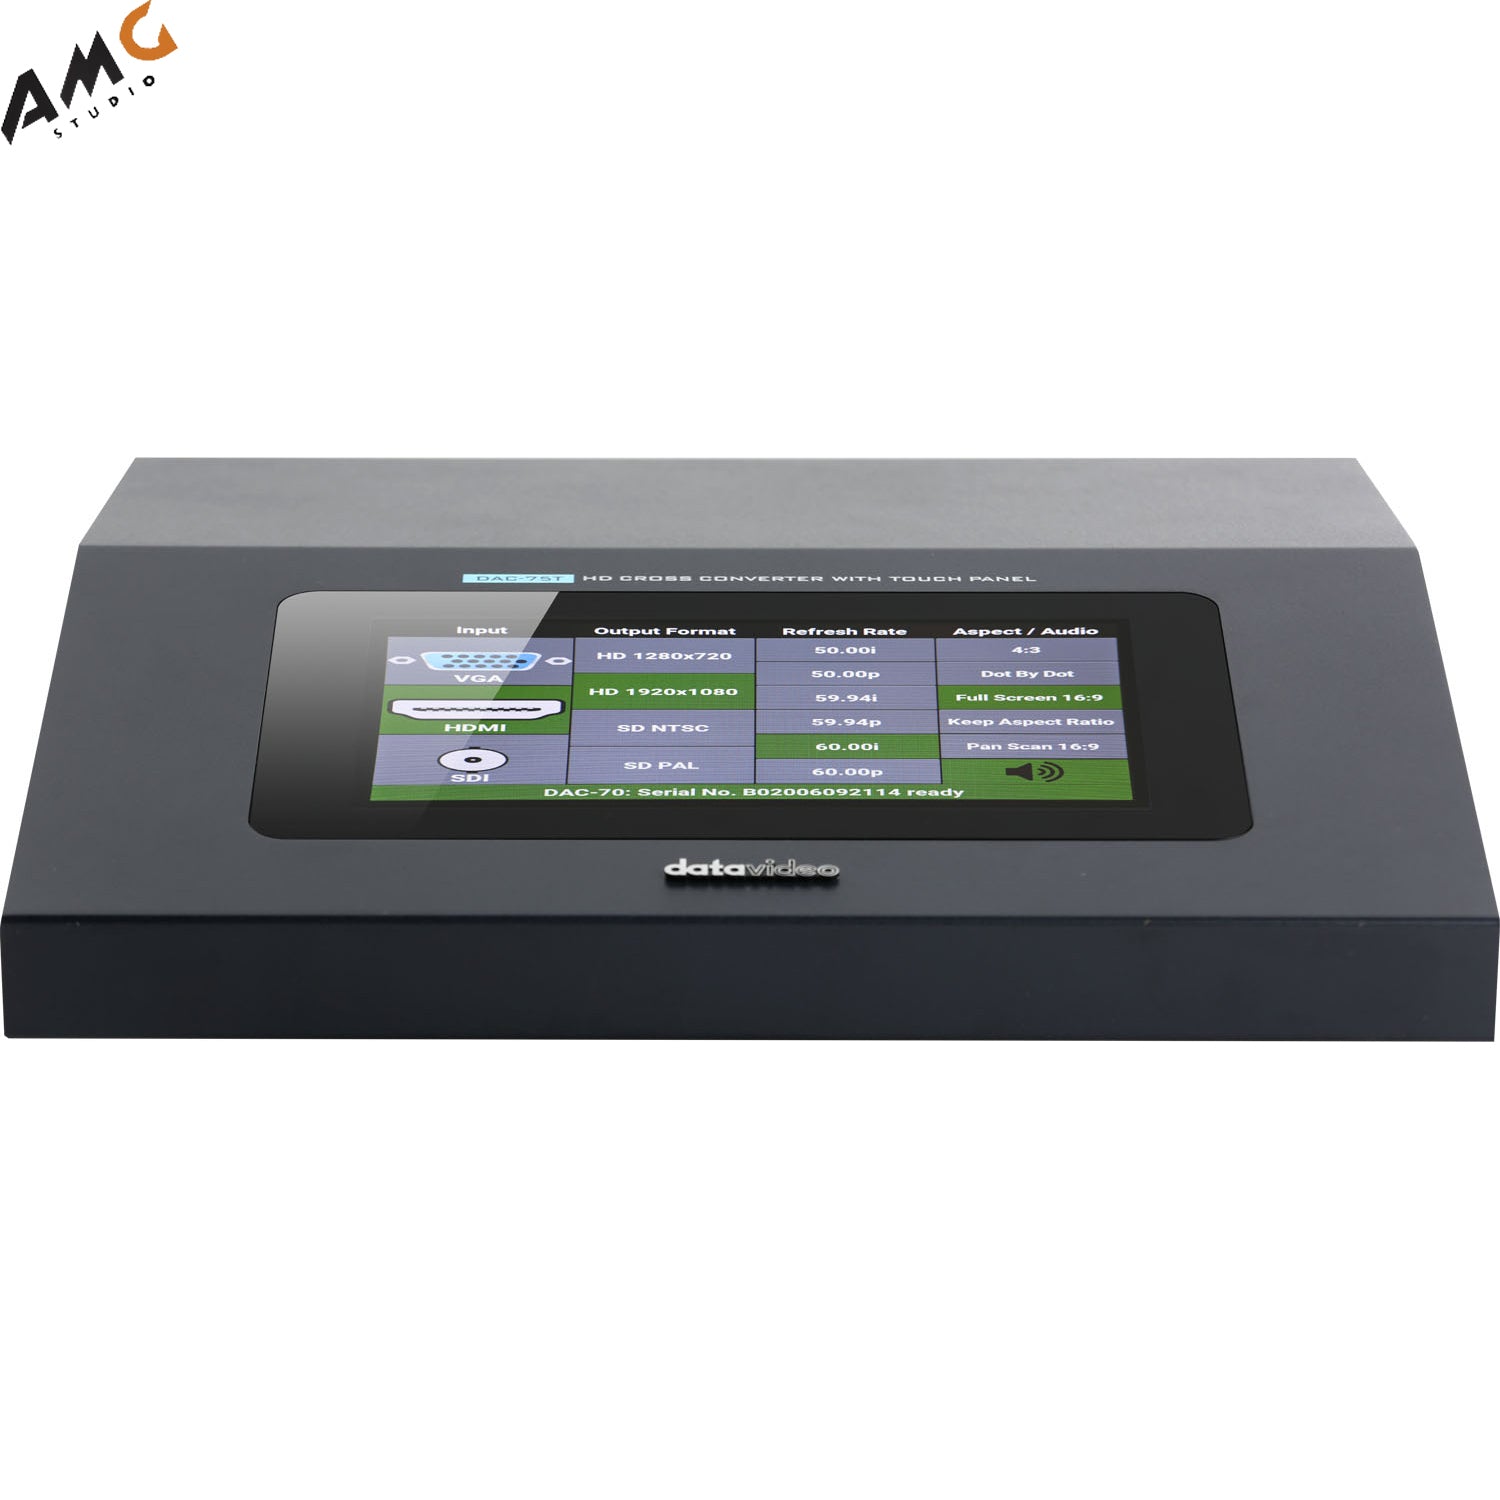 Datavideo DAC-75T HD Cross Converter with Touch Panel - Studio AMG